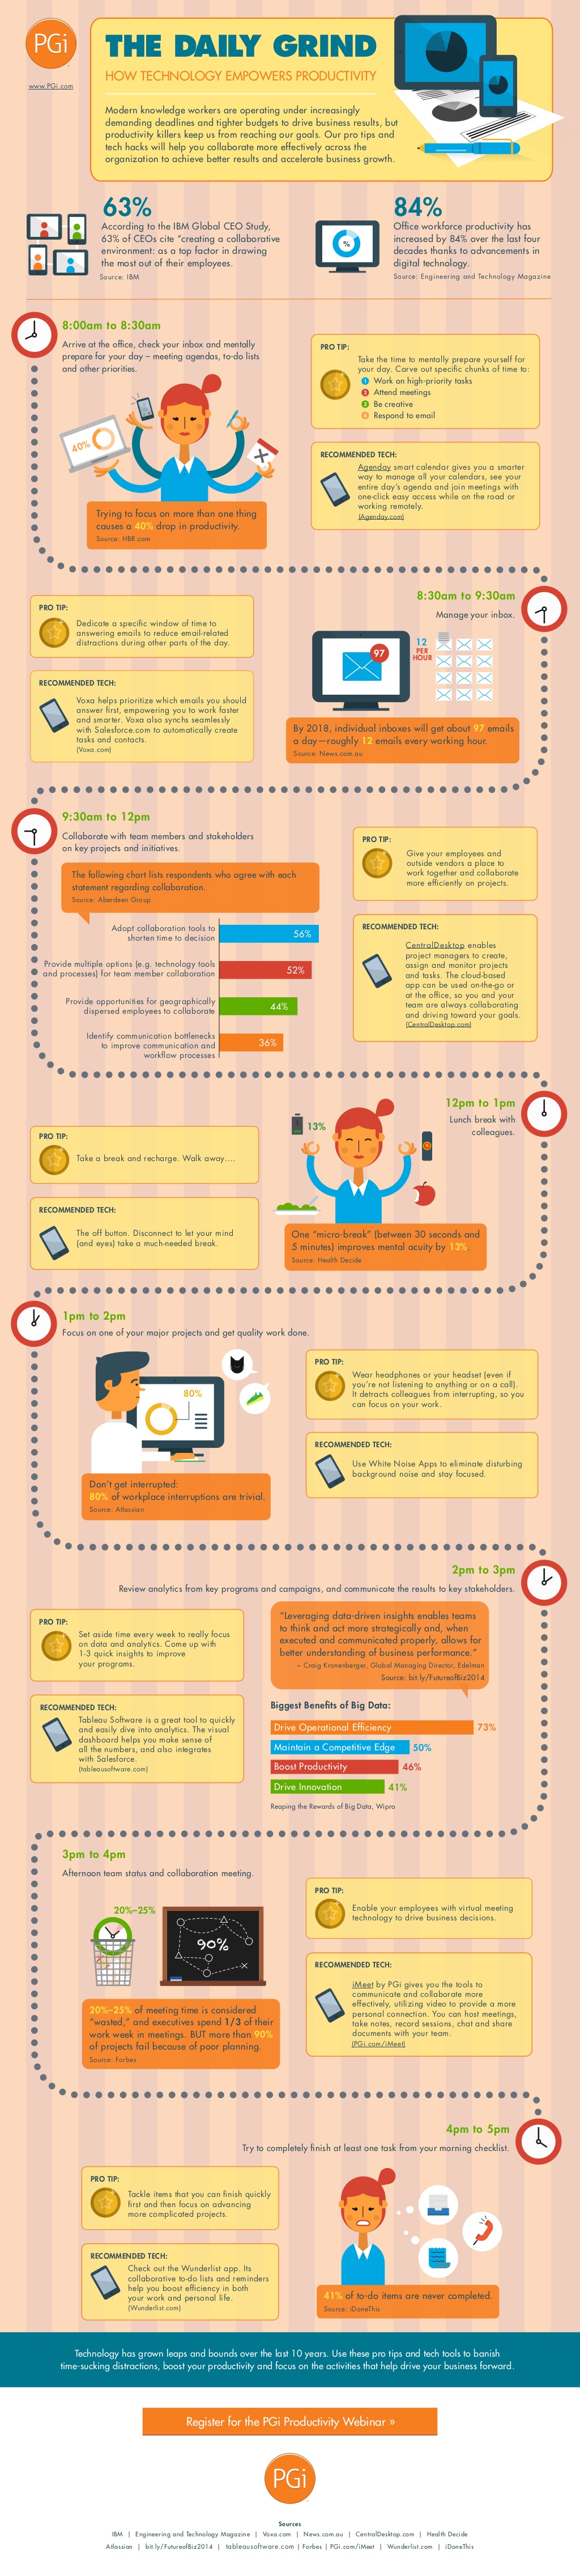 infographic-how-technology-empowers-productivity-in-the-daily-grind-1-1024